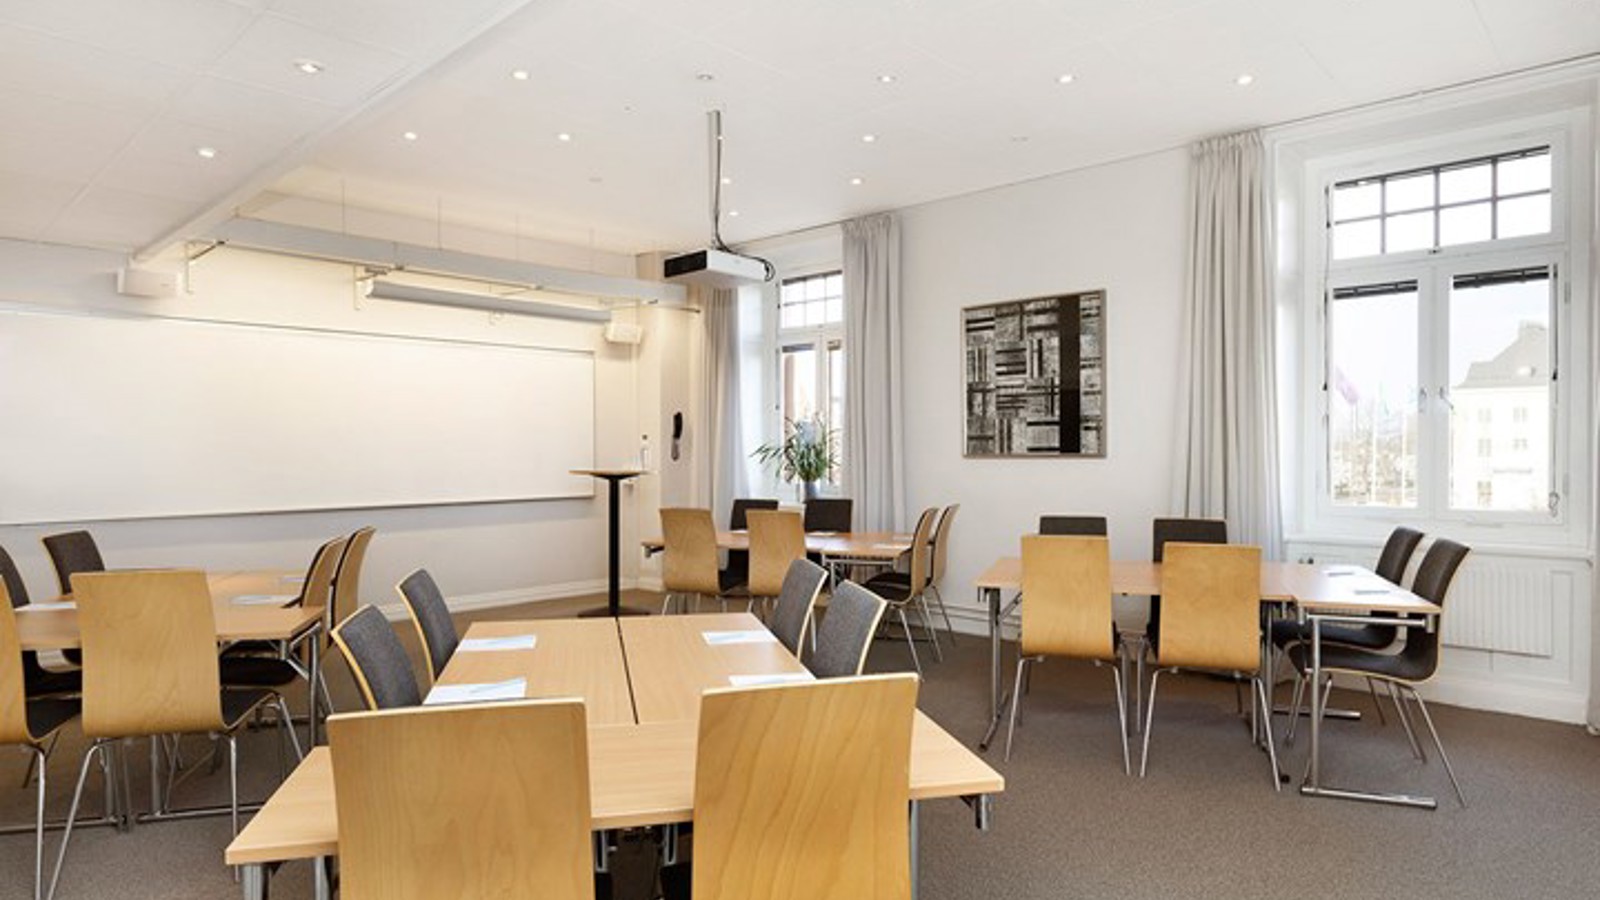 Conference room with island seating, white walls, wooden table and gray floor